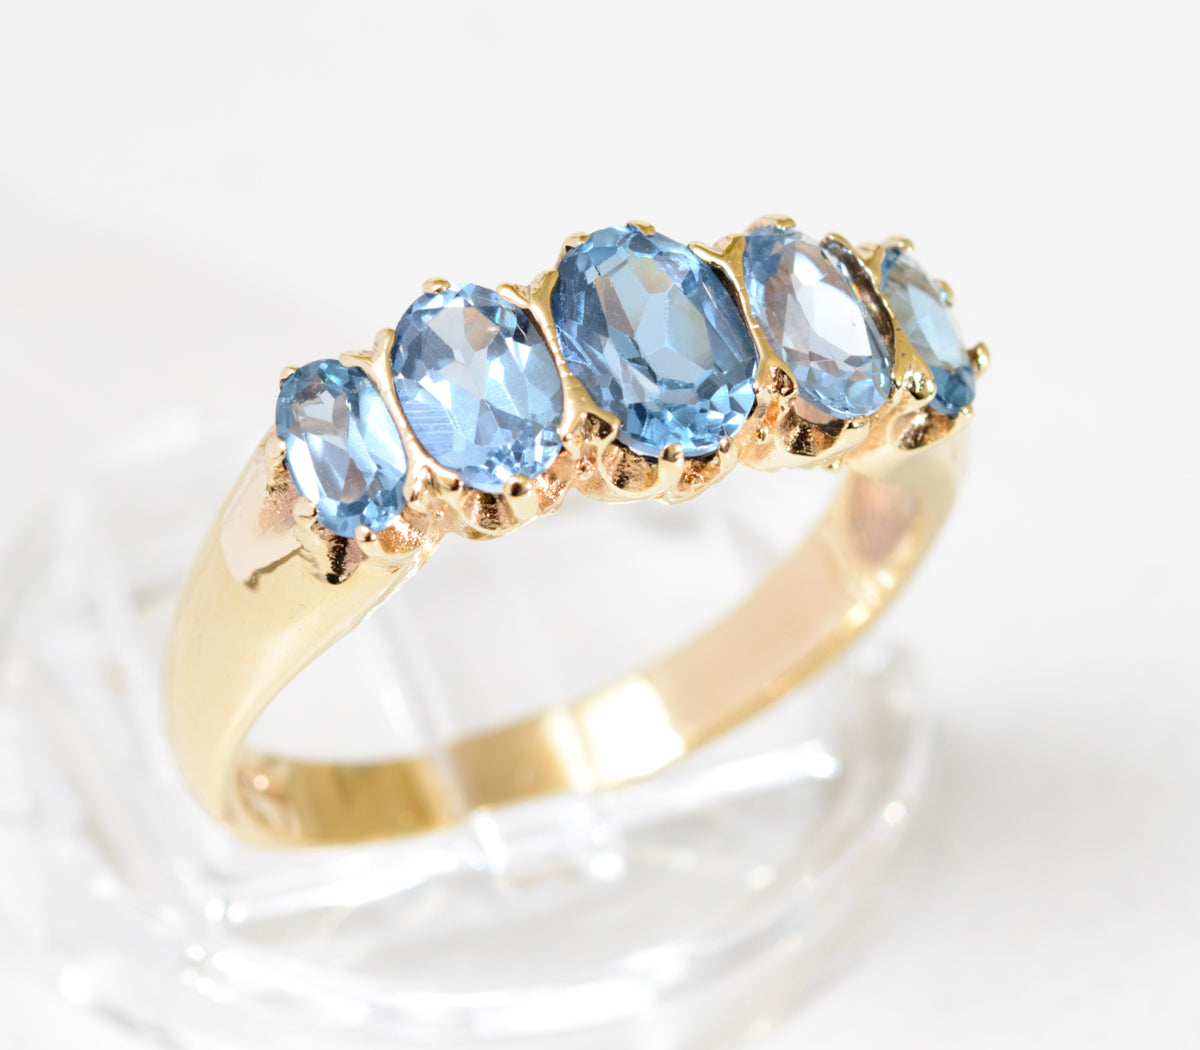 Vintage 9ct Gold Five Stone Classic Ring With Natural Blue Topaz Gemstone (A1777)